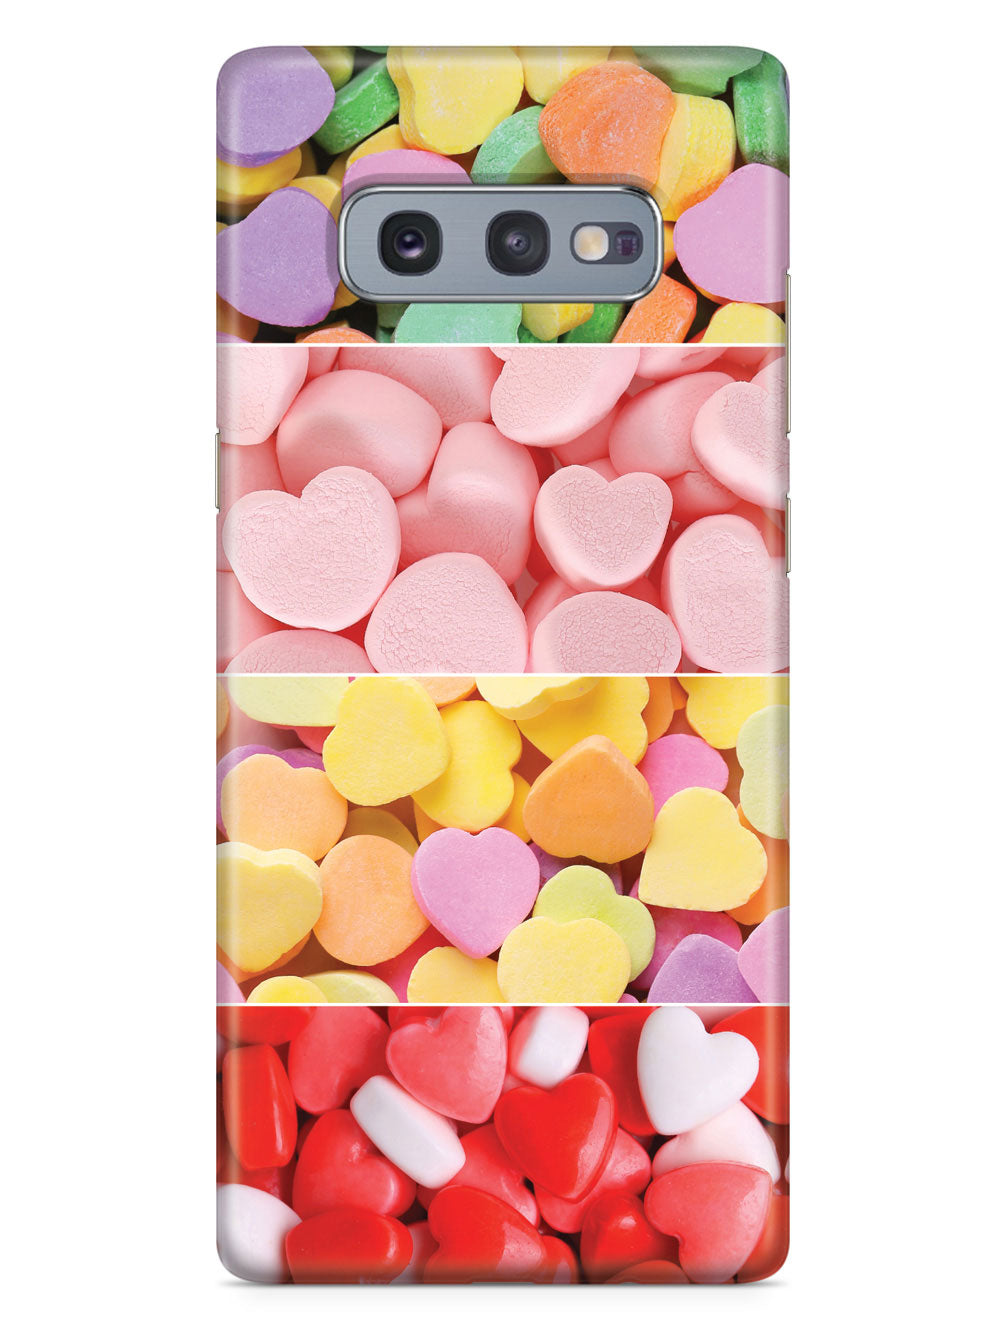 Variety of Candy Hearts Case